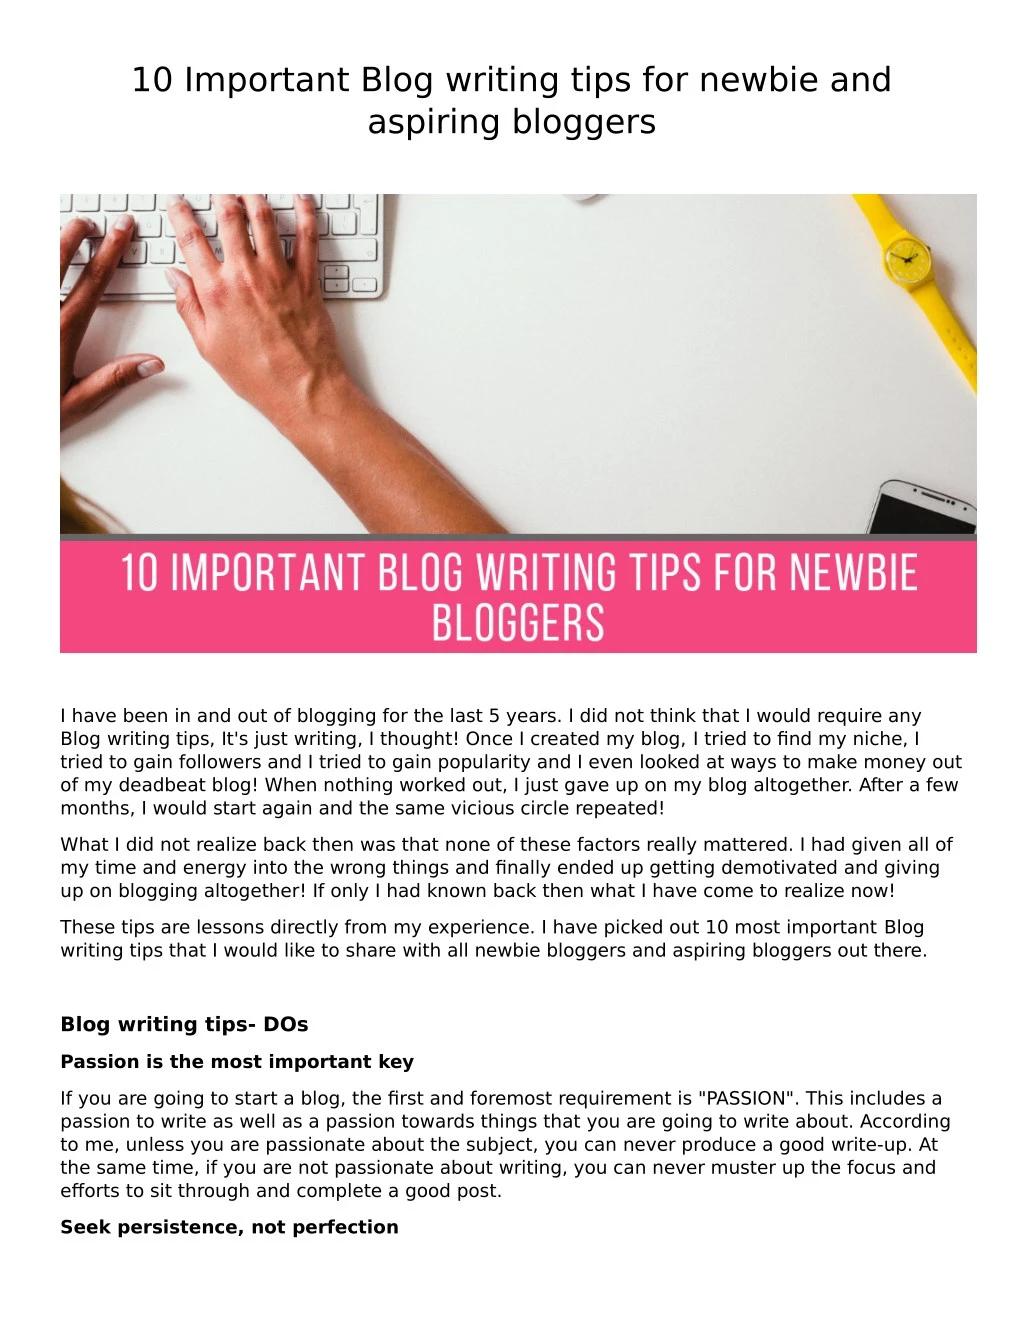 10 important blog writing tips for newbie